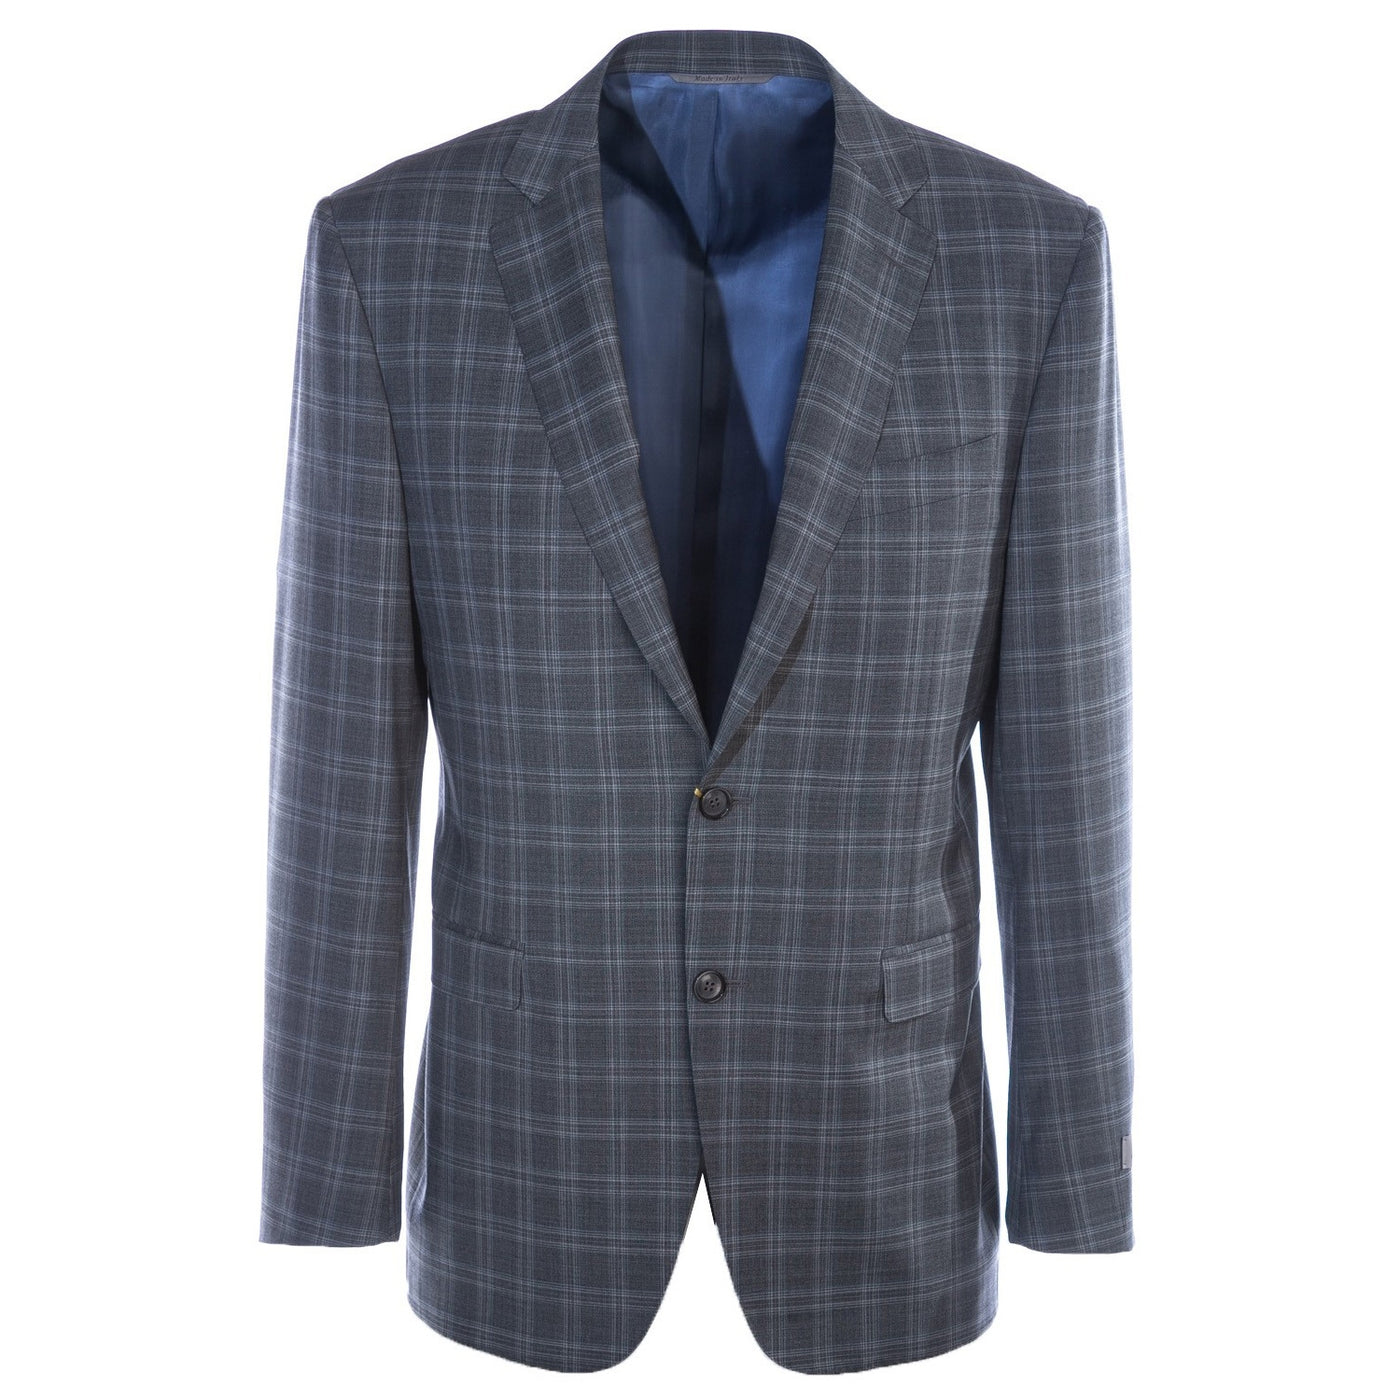 Canali Grey Check Suit in Grey Check Jacket